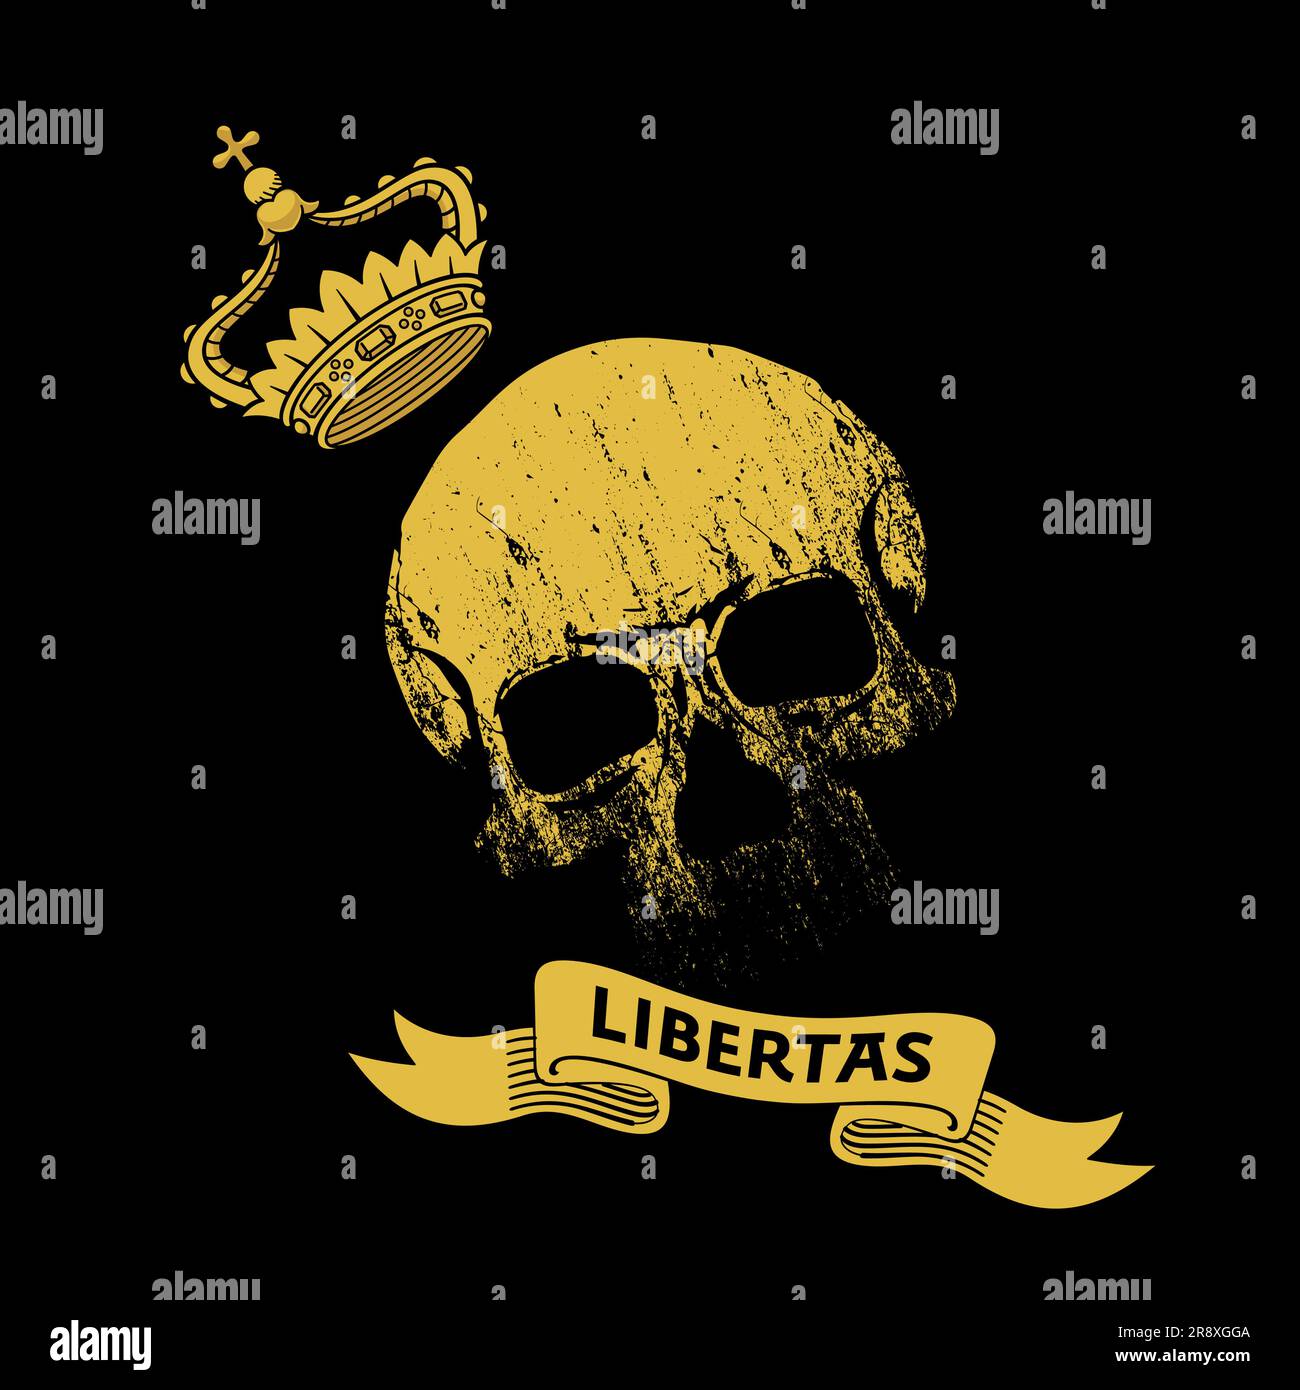 Libertas. Design for t-shirt of a golden skull with a crown and a text on a banderole isolated on black. Stock Vector